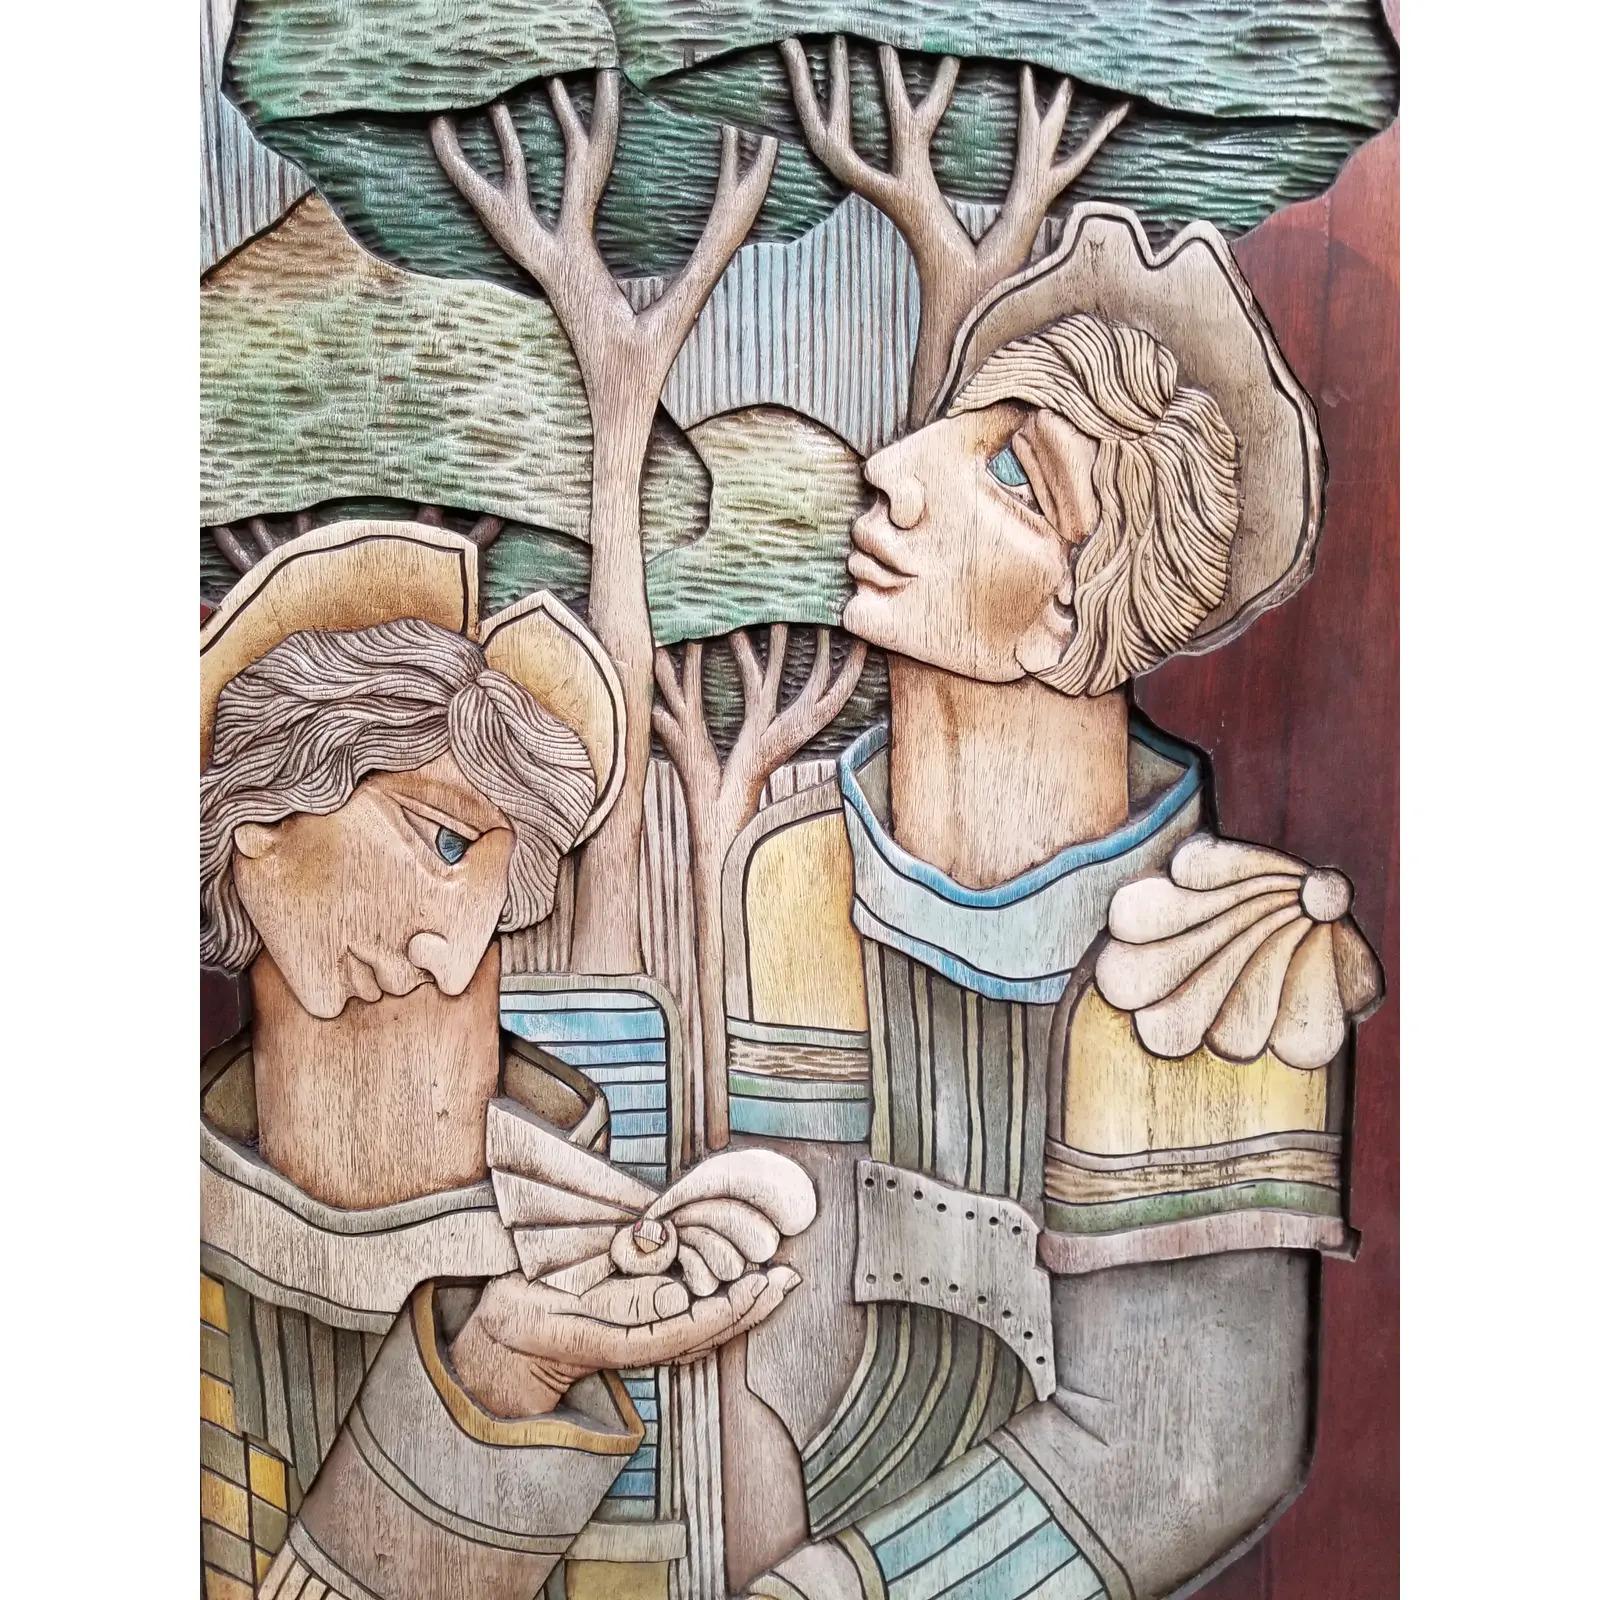 Impressive wall art carved mahogany wood panel / door handcrafted by Edison Luiz Fagundes de Castro AKA Edison Lufaac. Born 1952, Brazil. Signed and dated 1987. Stylized figures and trees. Hand painted poly-chrome finish.